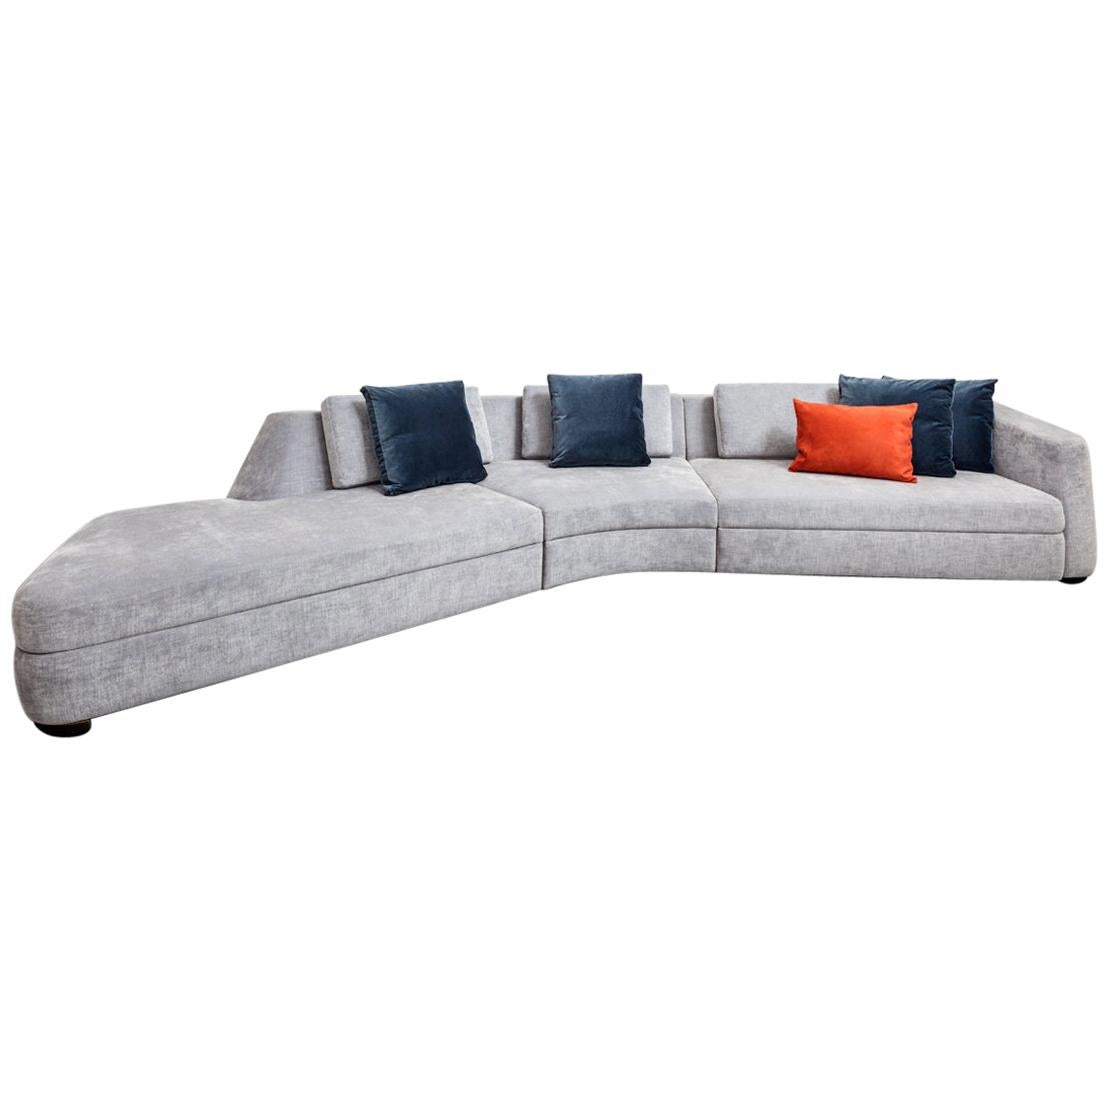 Tuya collection is both architectural and modern, the clean lines and smooth curves send your eye on a visual journey around every piece. This collection contains both seating and surface components. The sofa is available in both a right or left